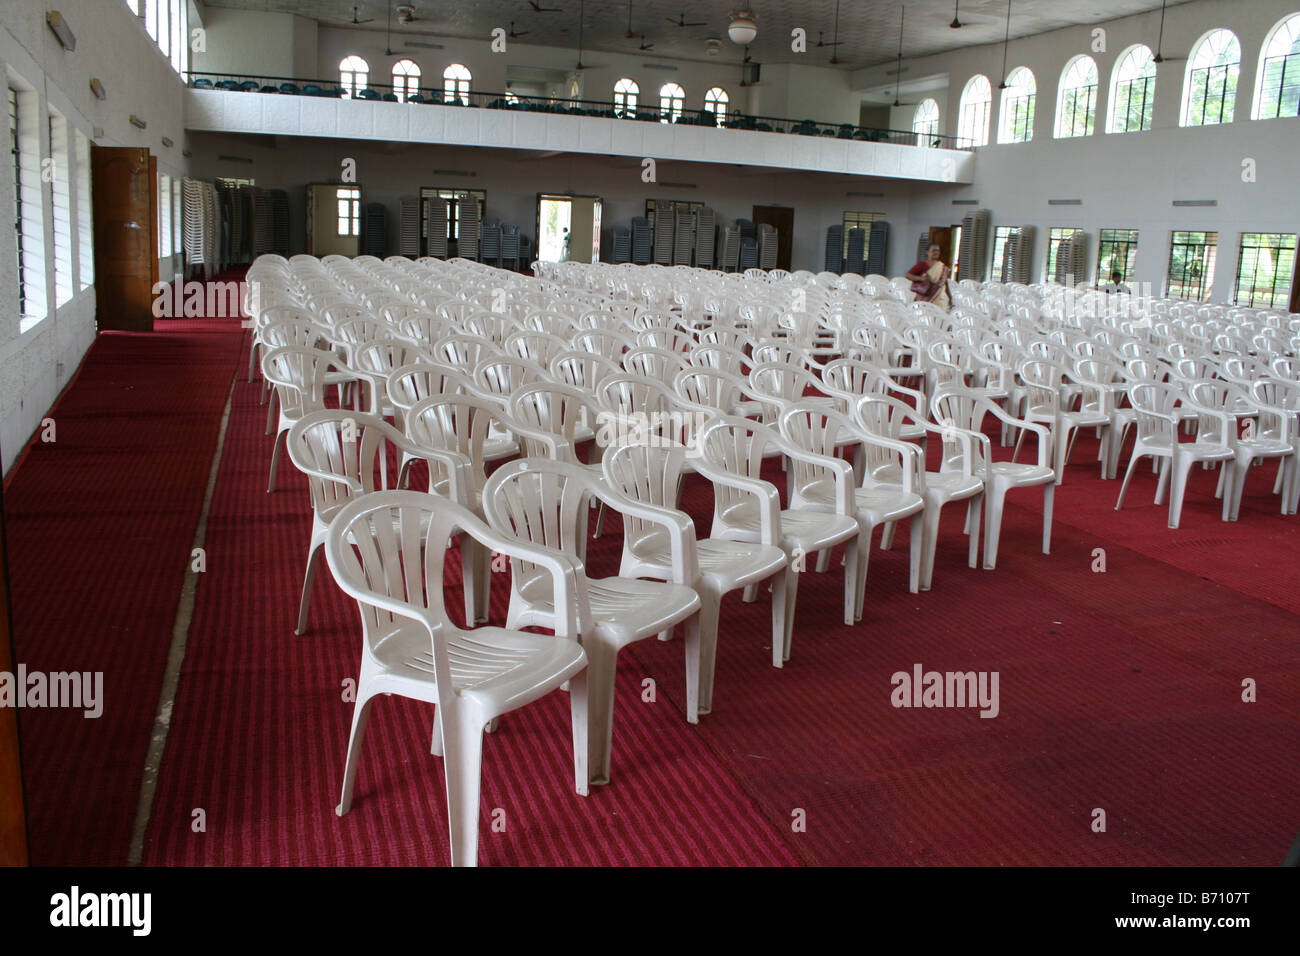 Large number of white color chairs on red carpet arranged for important public function or meeting in a huge hall with balcony Stock Photo